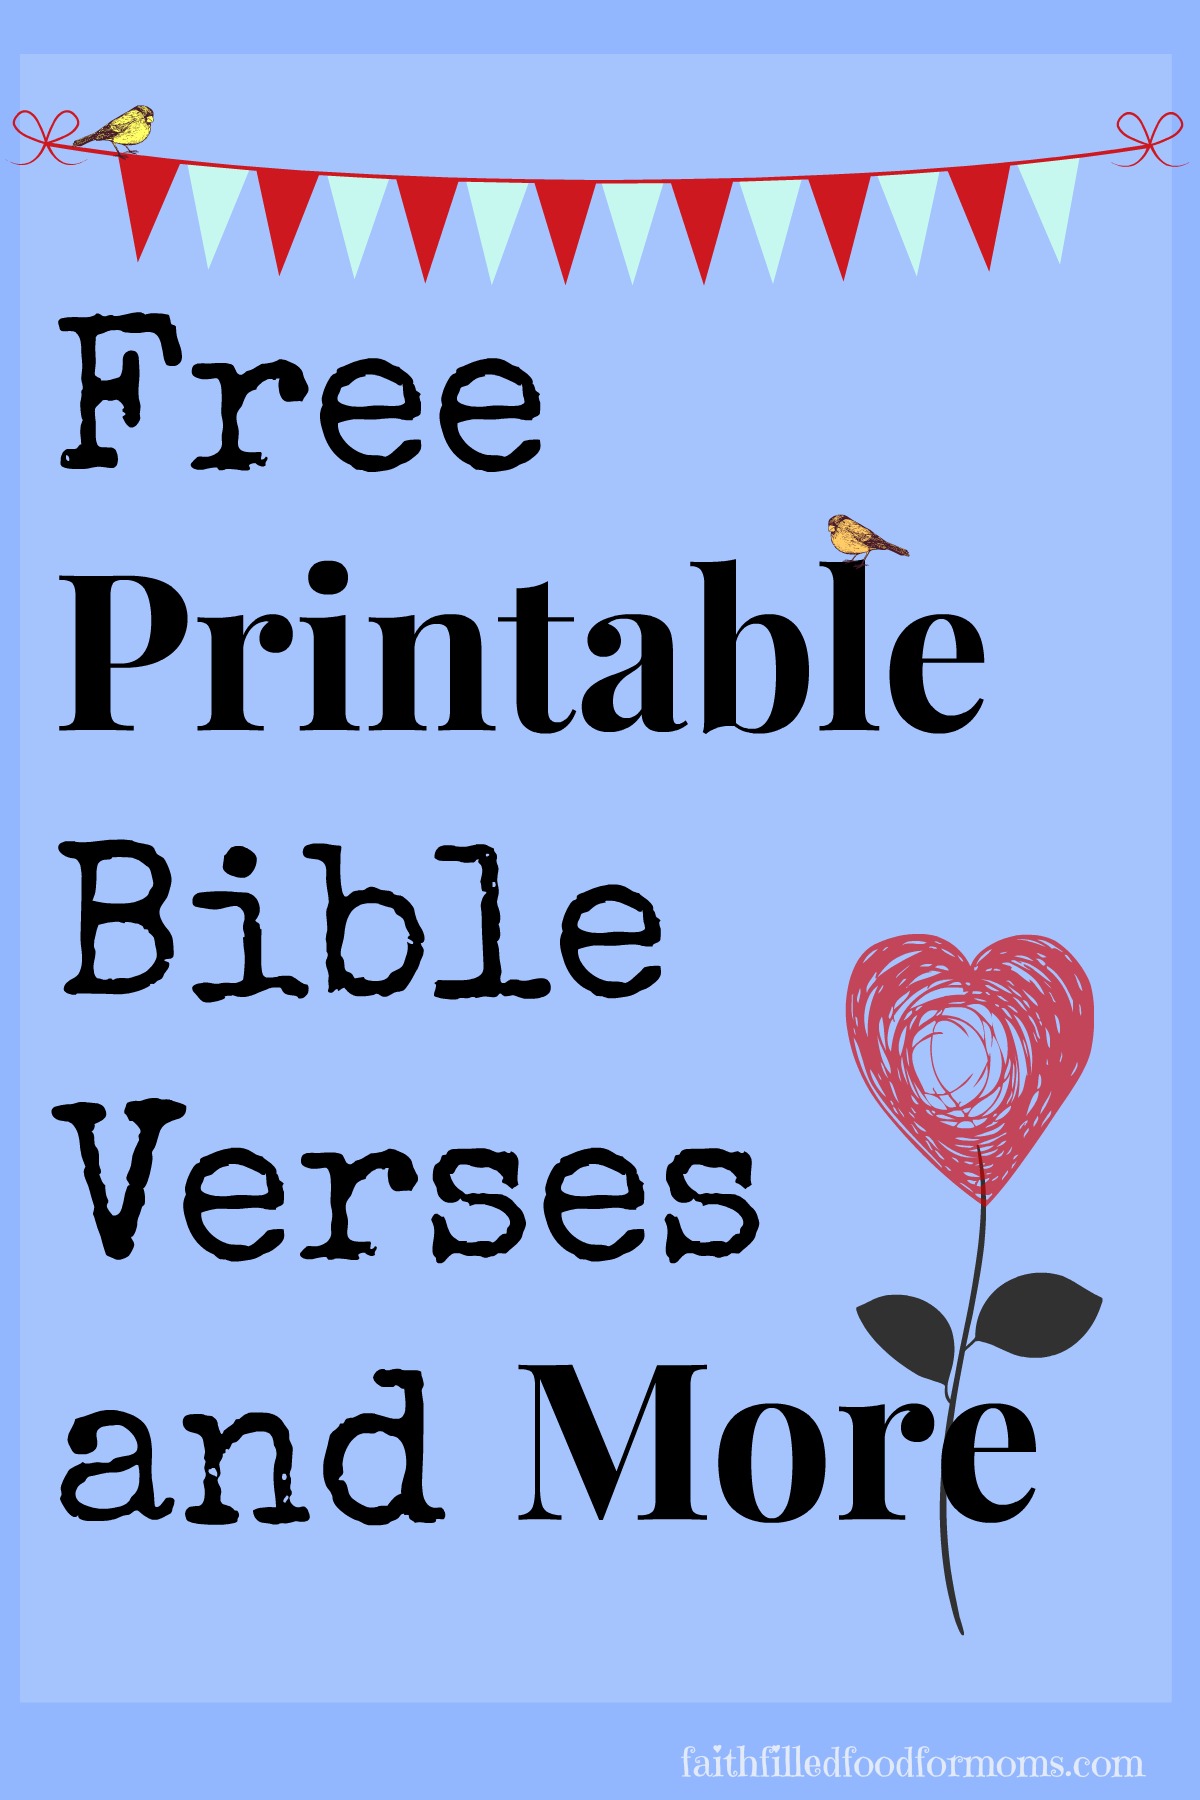 Free Christian Encouragement Cliparts, Download Free Clip.